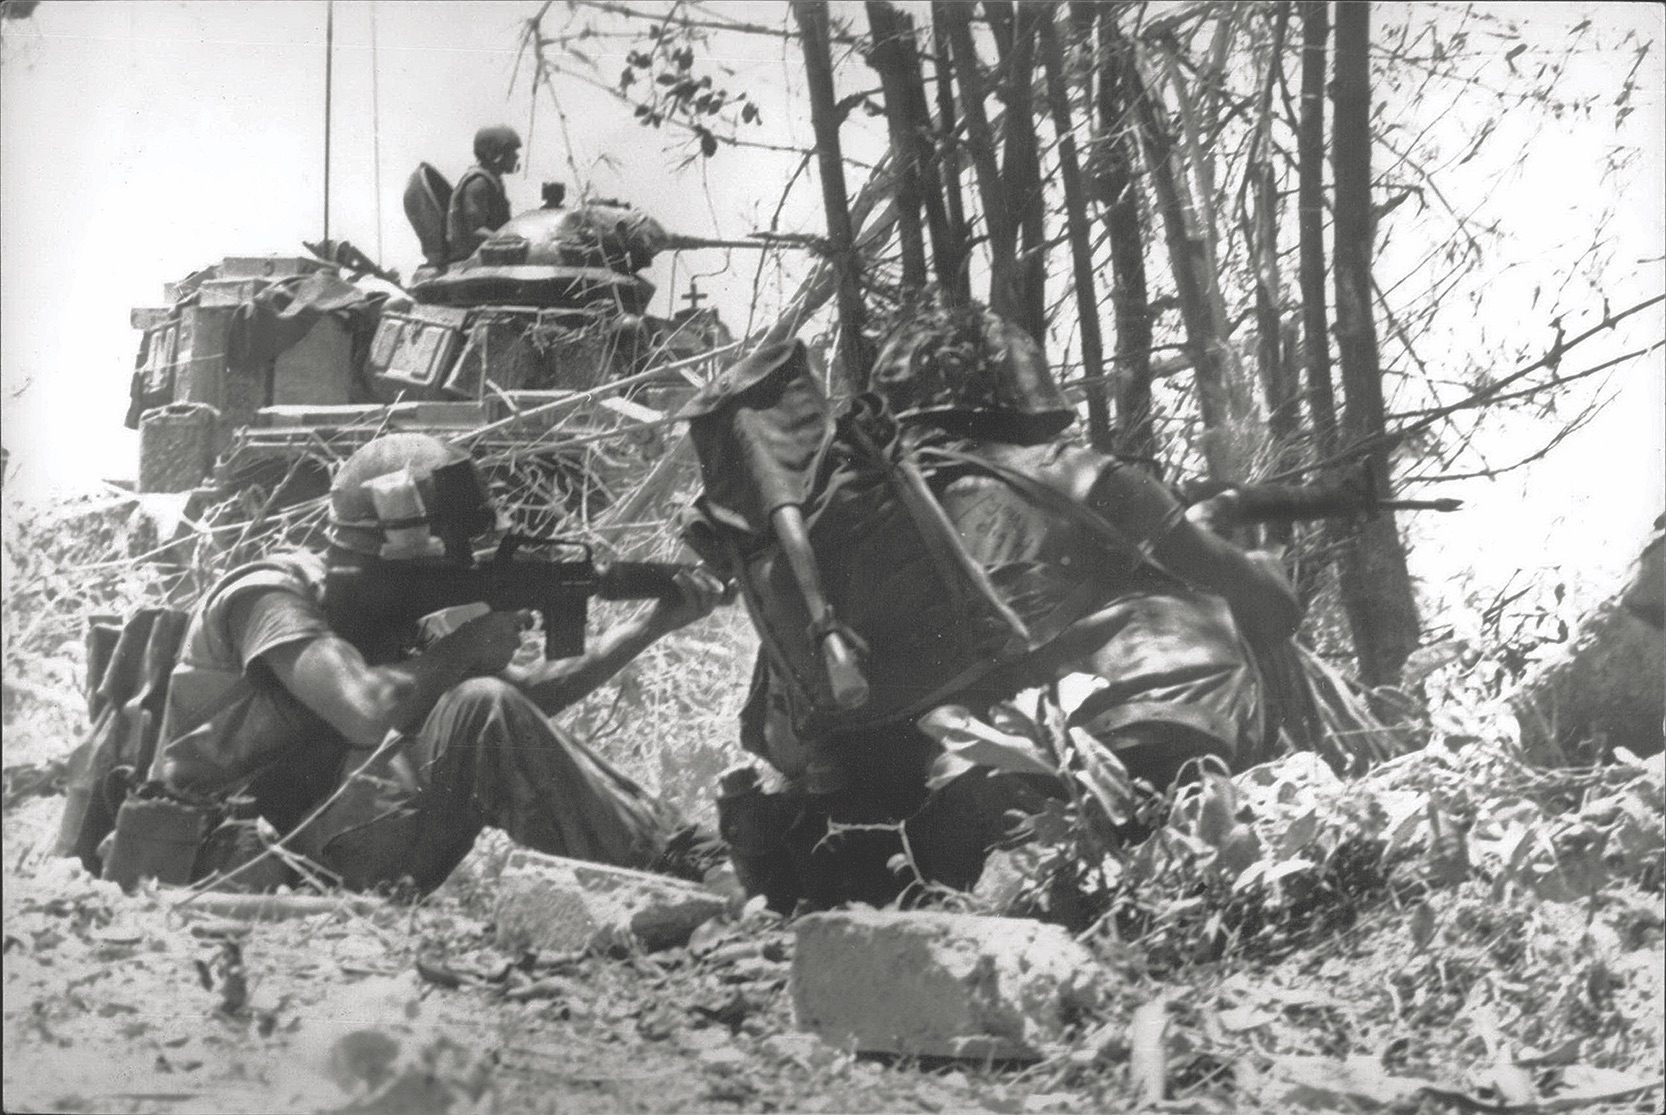 A Patton tank and two Marine riflemen in Task Force Robbie battle the NVA in the Cam Vu area. (Keystone/Alamy)